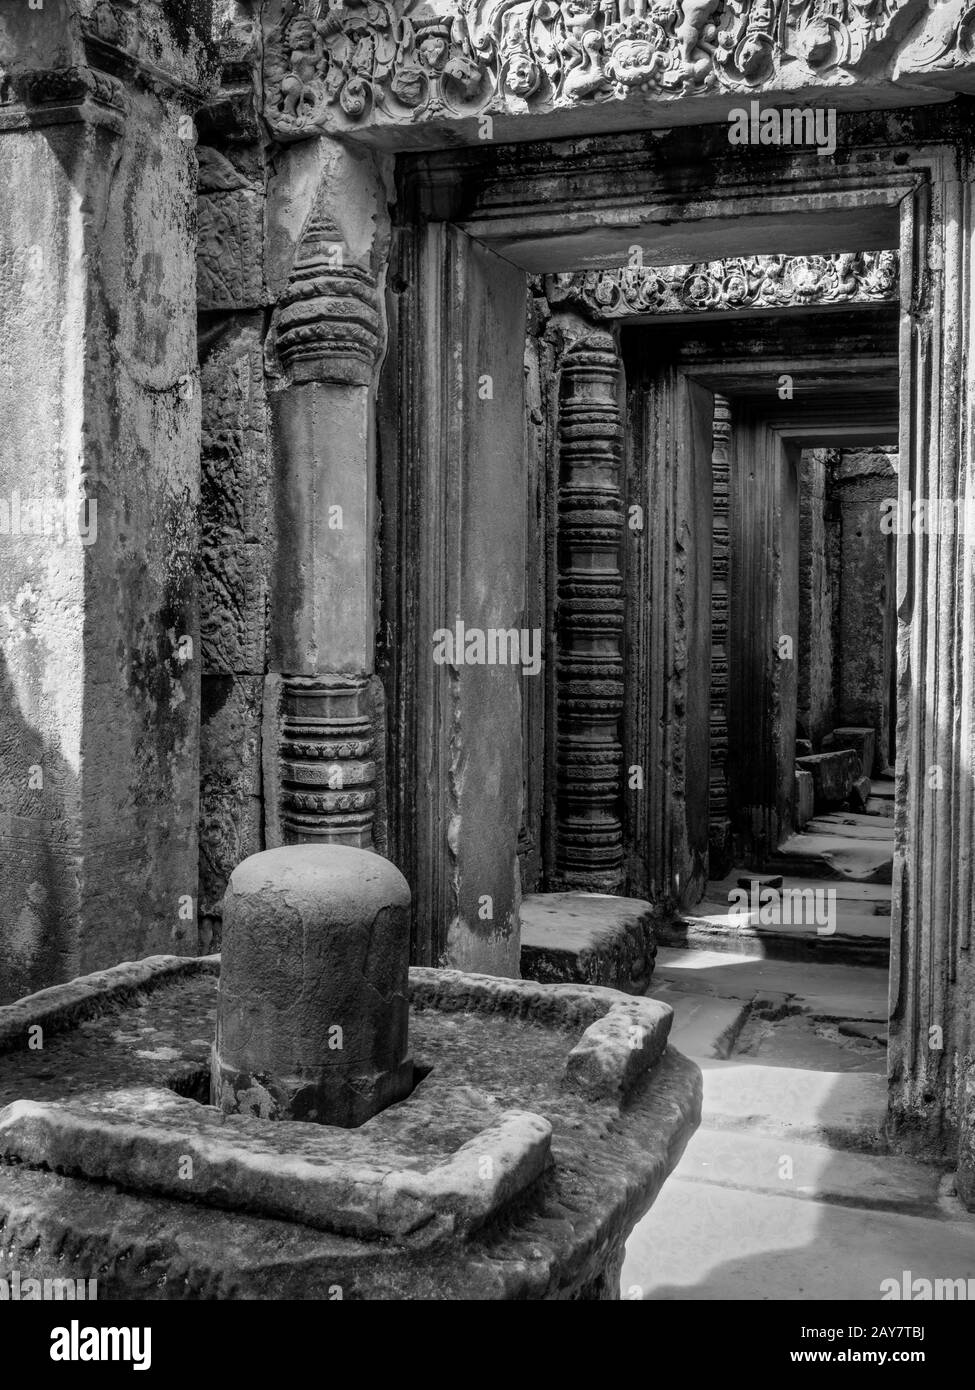 Image from Preaha Khan temple, a part of the Angkor Wat Archeological Park, Siem Reap, Cambodia. Stock Photo